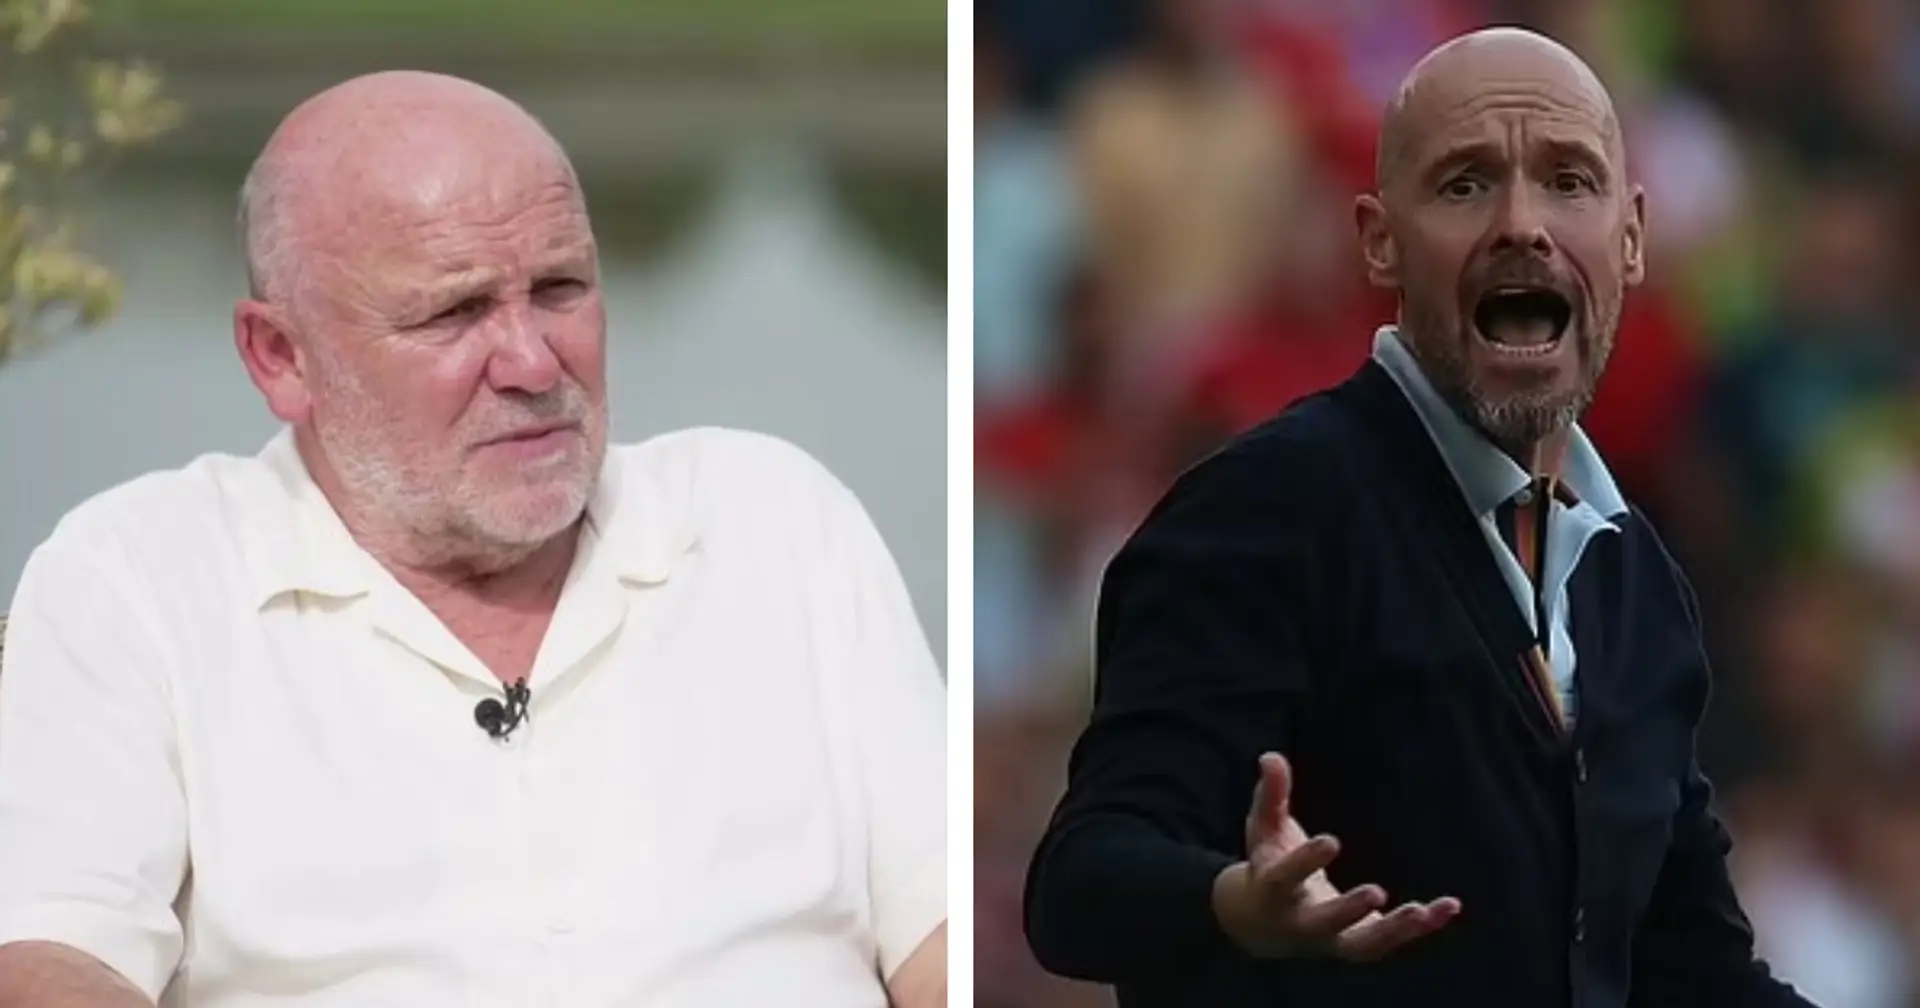 'You lose 2 in a row and it's a crisis.': Mike Phelan explains the kind of pressure Ten Hag is dealing with at Man United